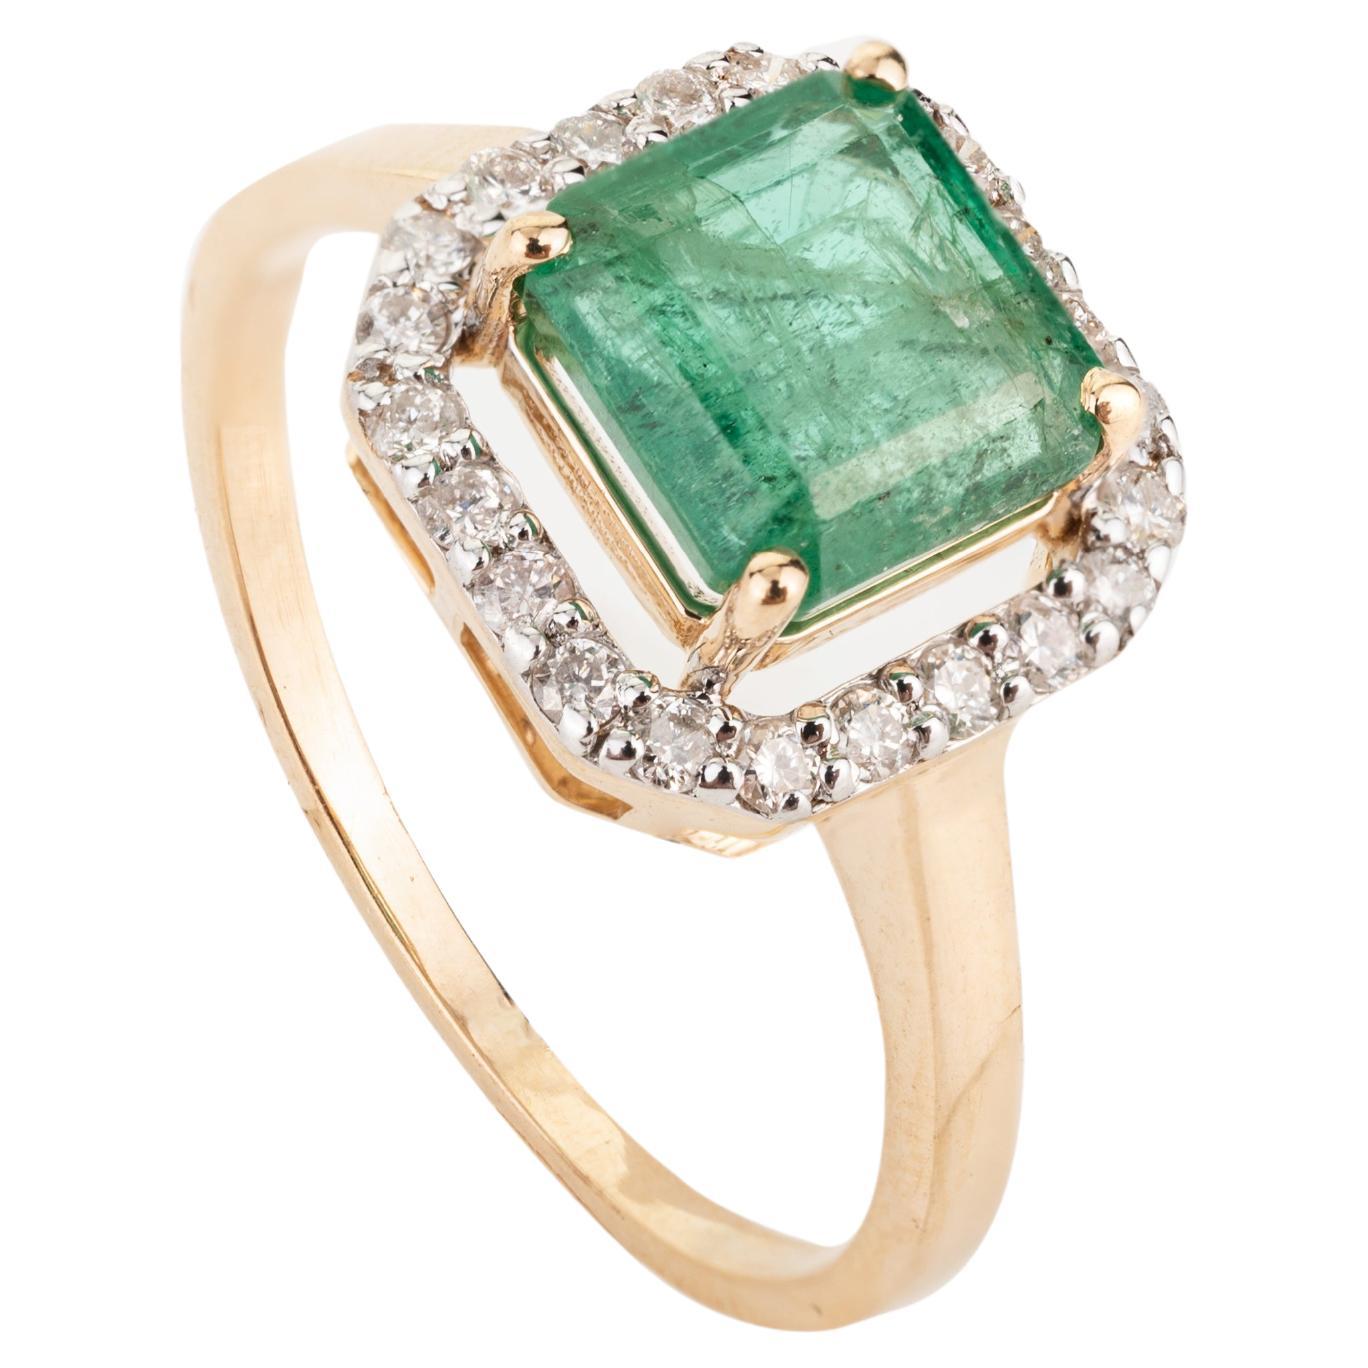 For Sale:  Certified 2.7 Carat Octagon Emerald Halo Diamond Wedding Ring in 18k Yellow Gold